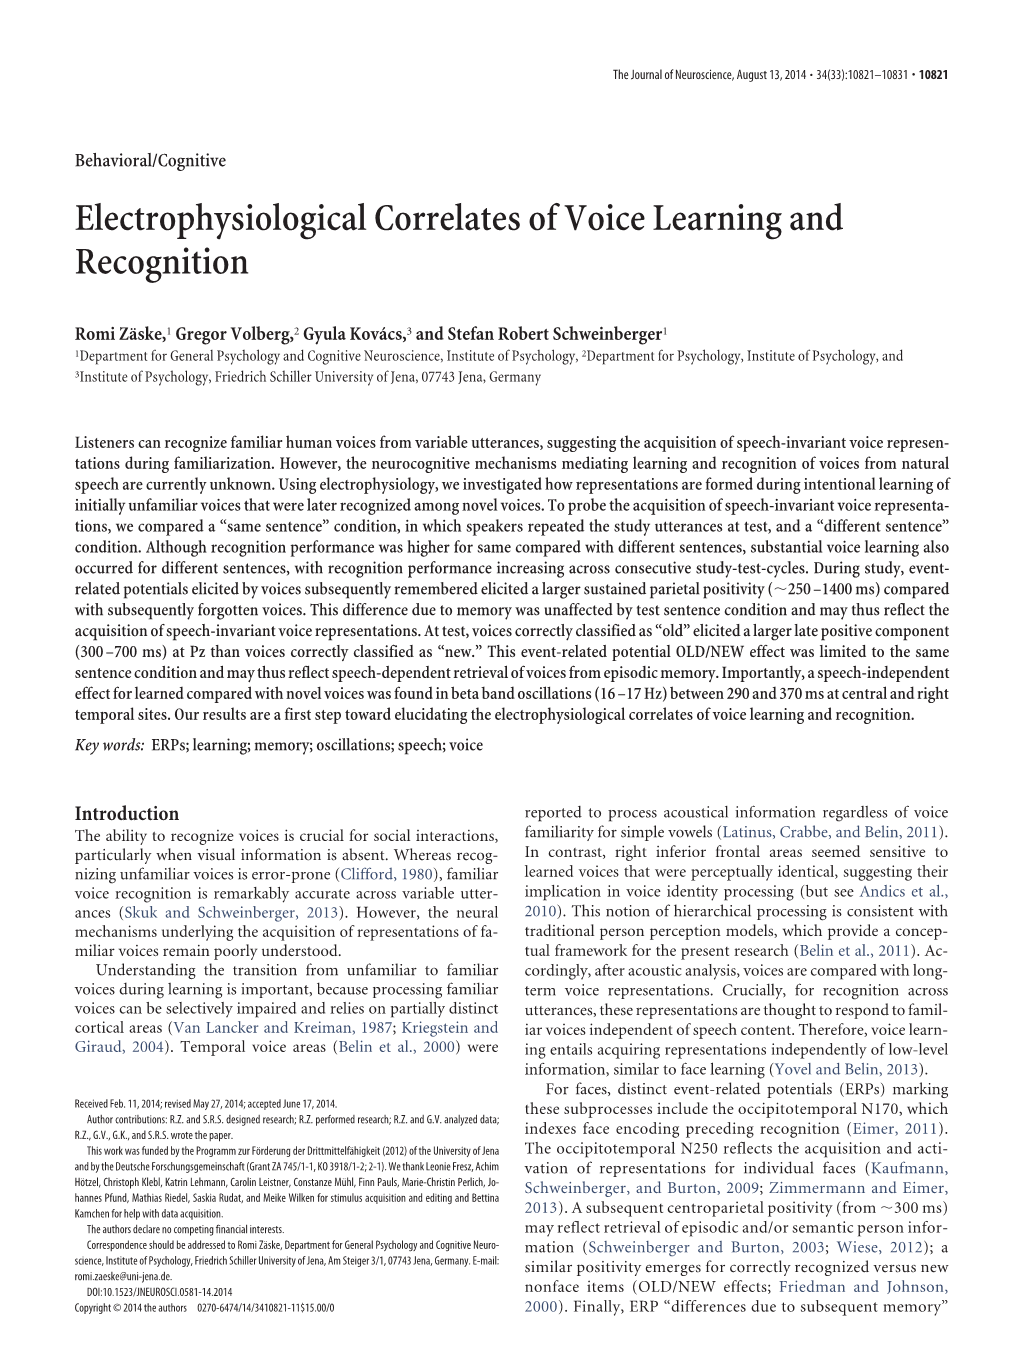 Electrophysiological Correlates of Voice Learning and Recognition